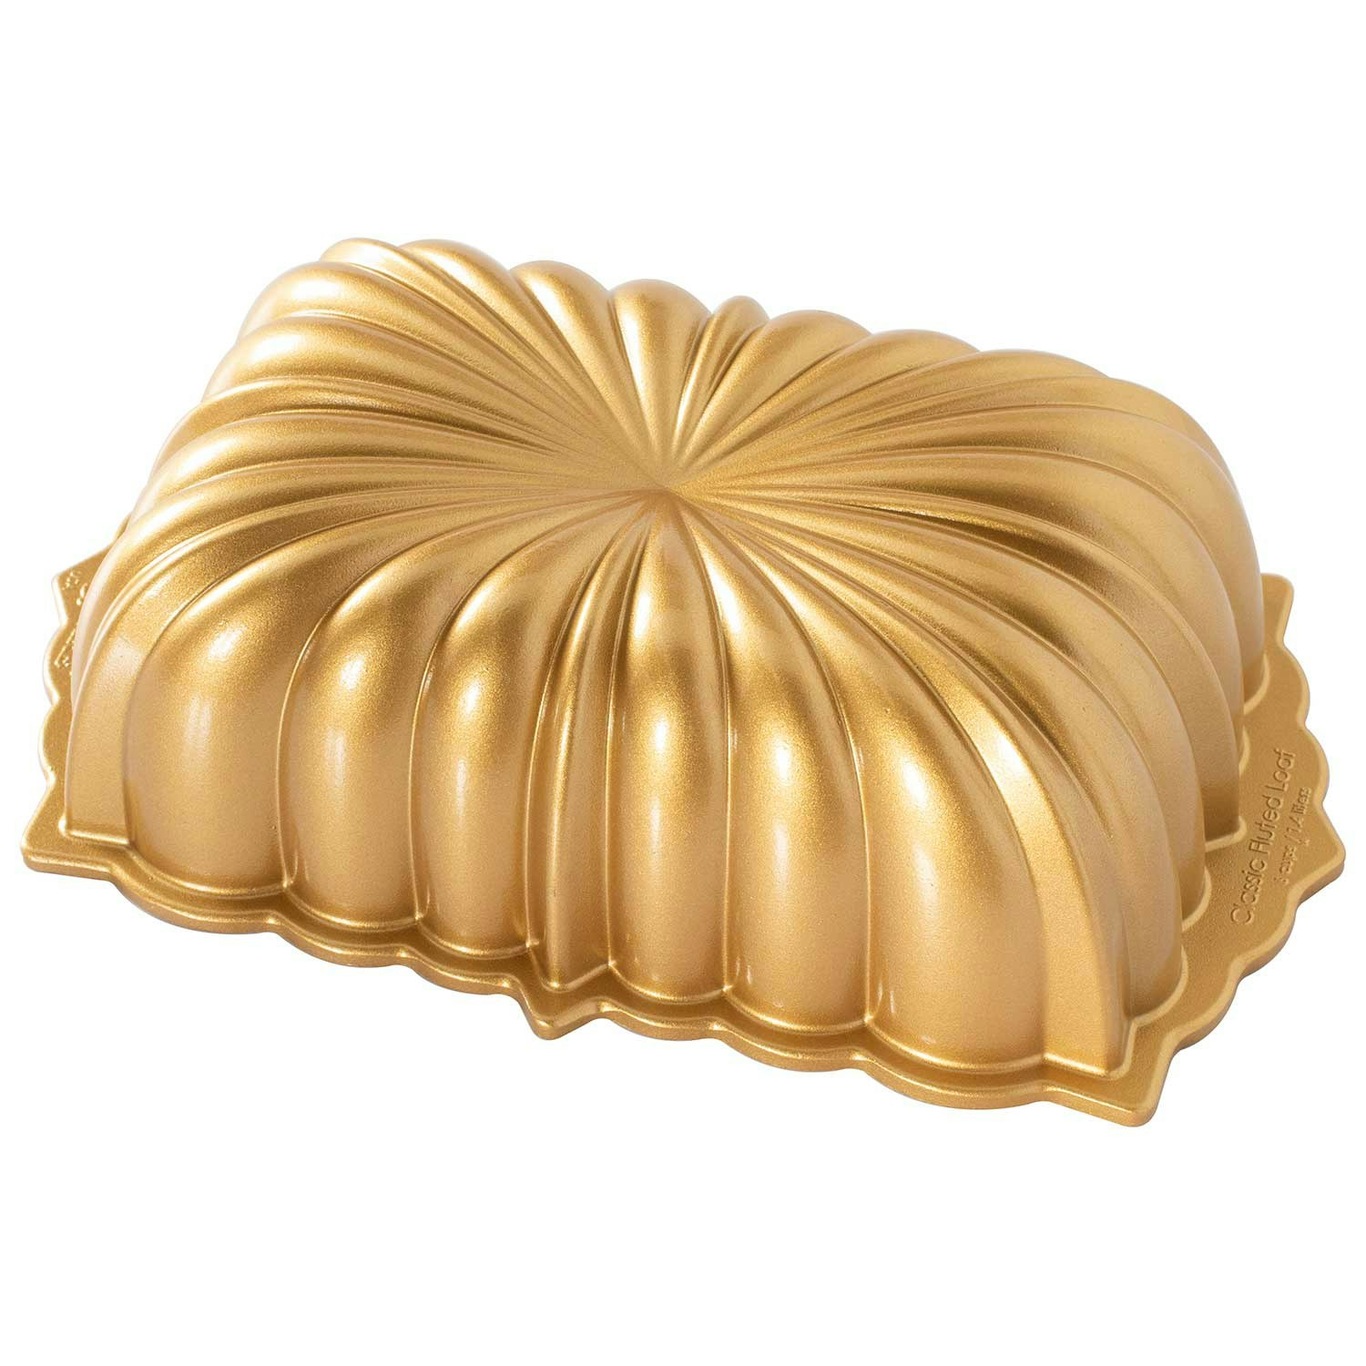 https://royaldesign.com/image/2/nordic-ware-classic-fluted-loaf-pan-0?w=800&quality=80